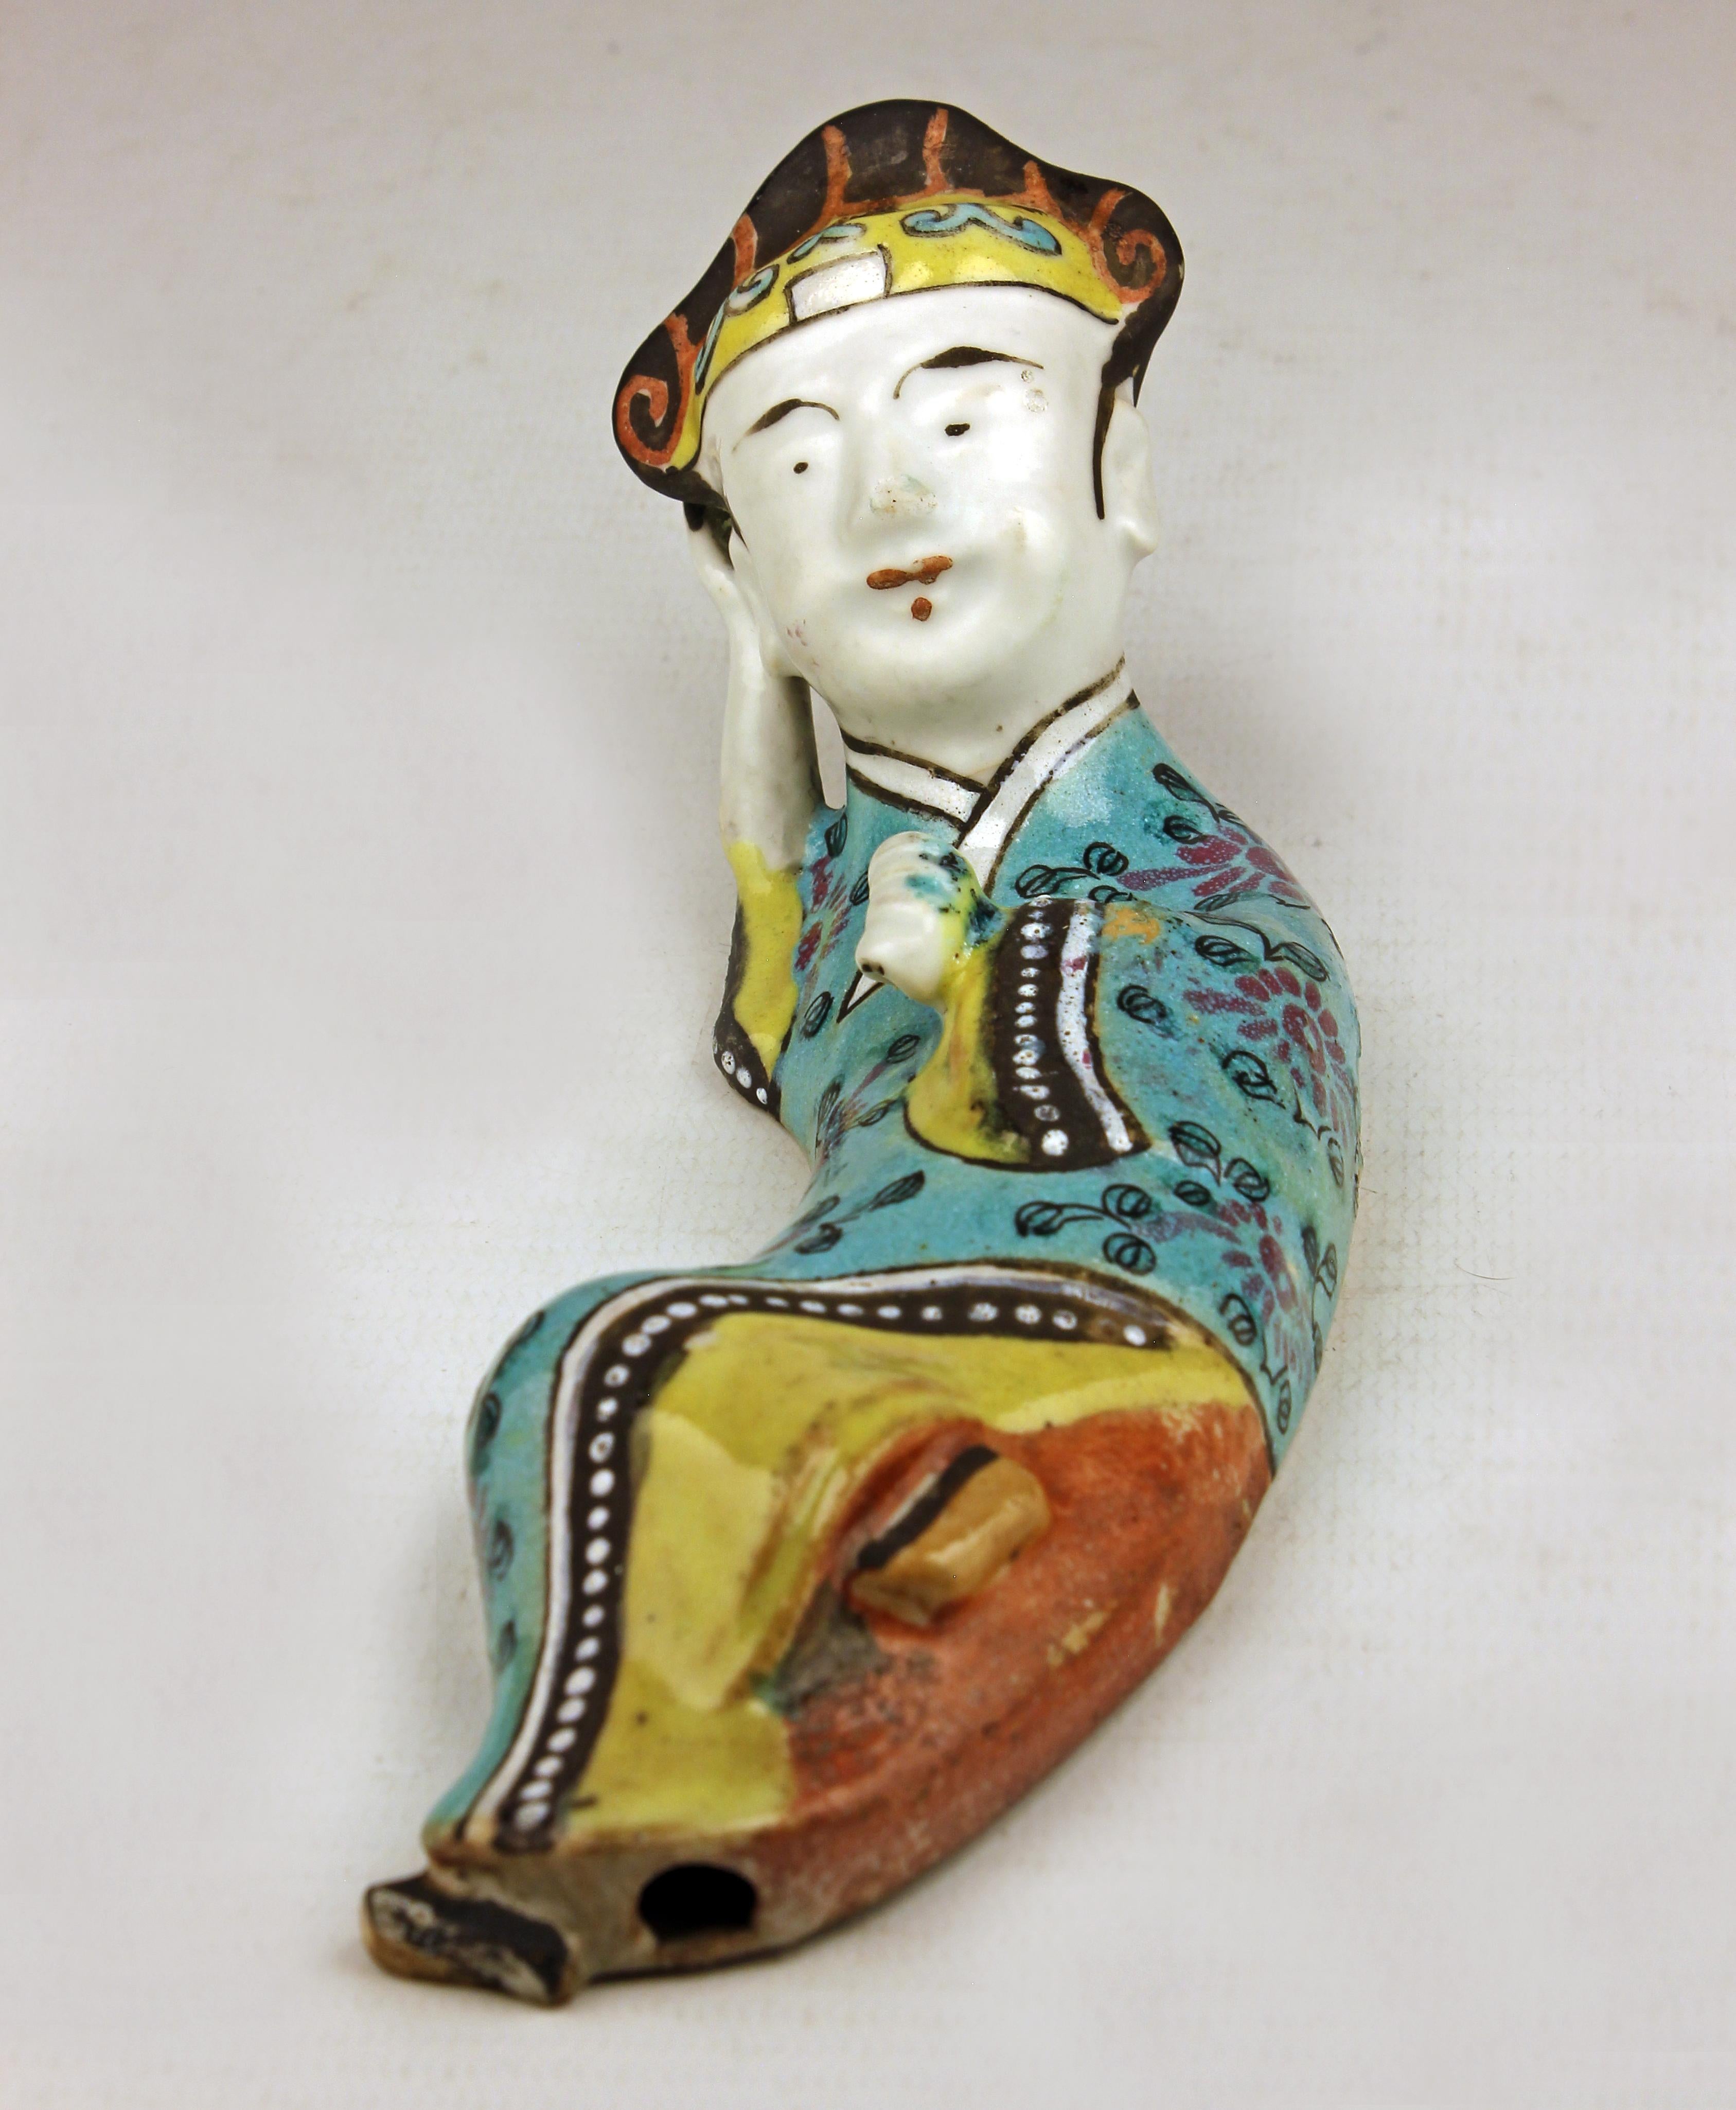 Pair of Mid-19th Century/Qing Dinasty of Enameled Chinese Porcelain Figurines For Sale 4